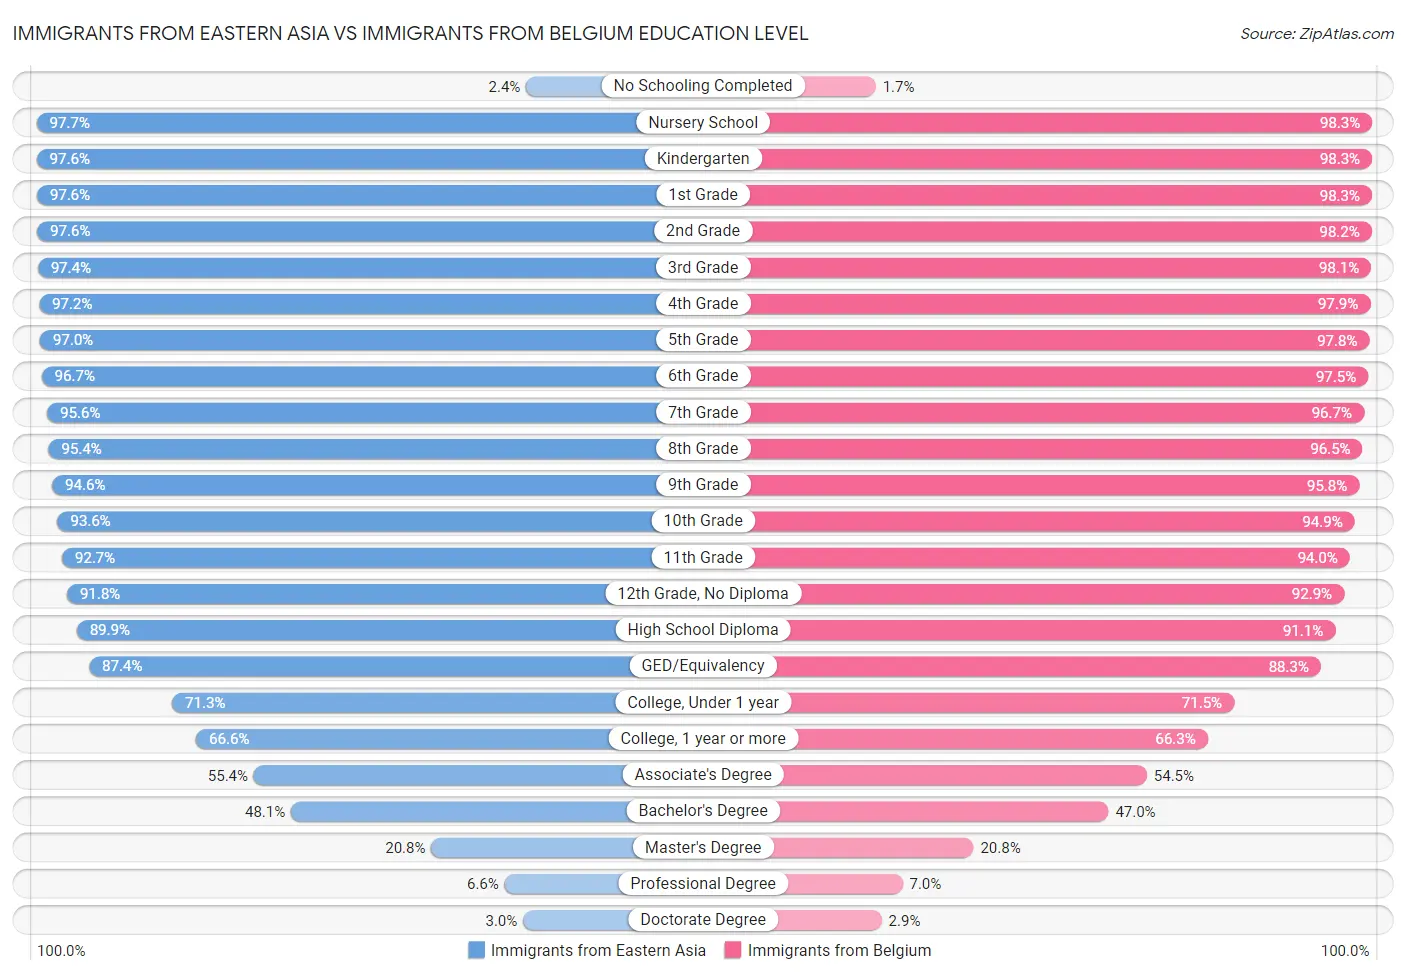 Immigrants from Eastern Asia vs Immigrants from Belgium Education Level